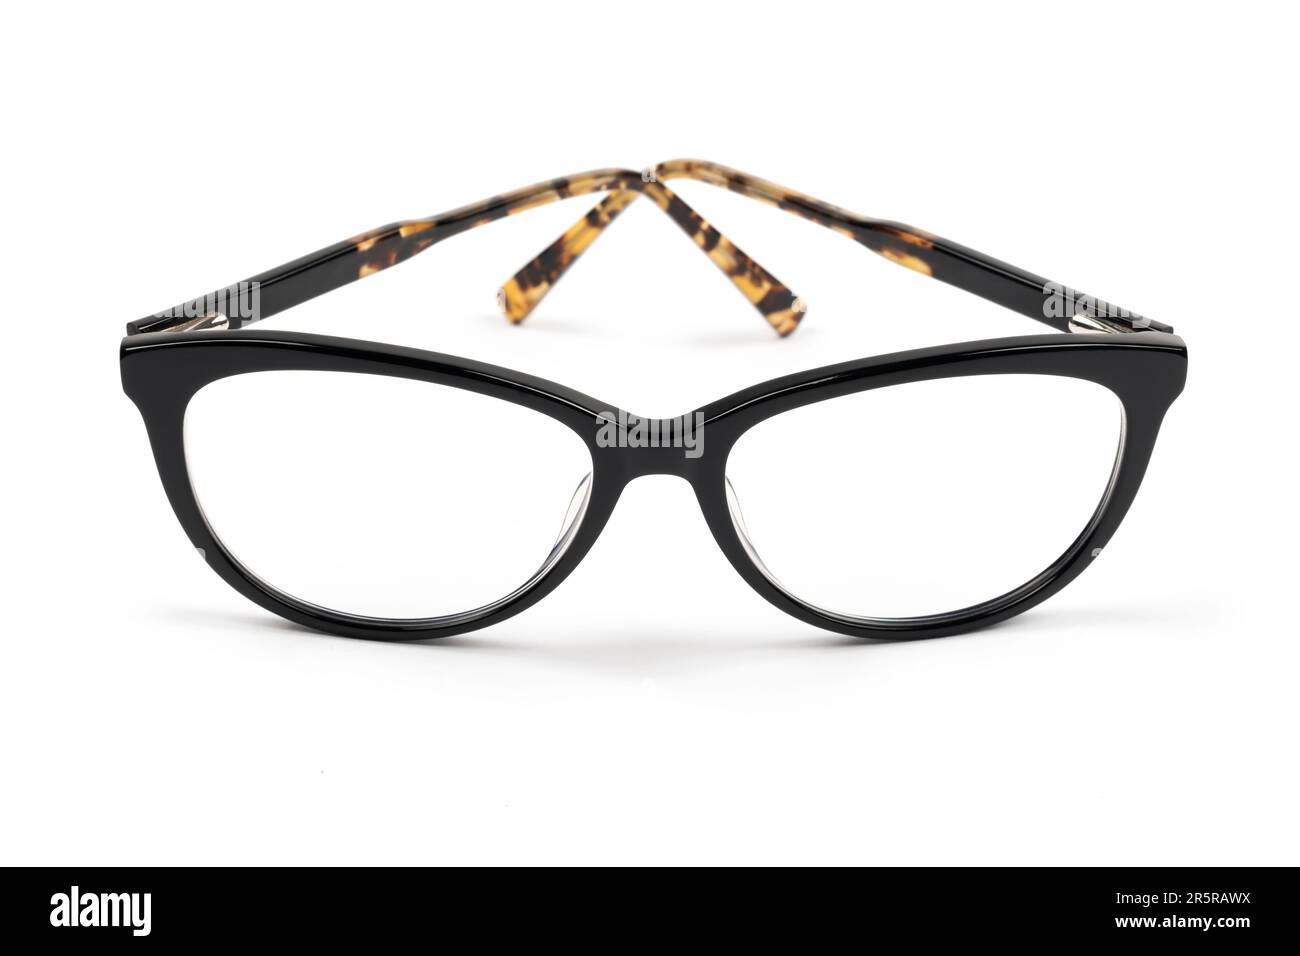 Glasses with black and tortoiseshell frames isolated on a white background Stock Photo